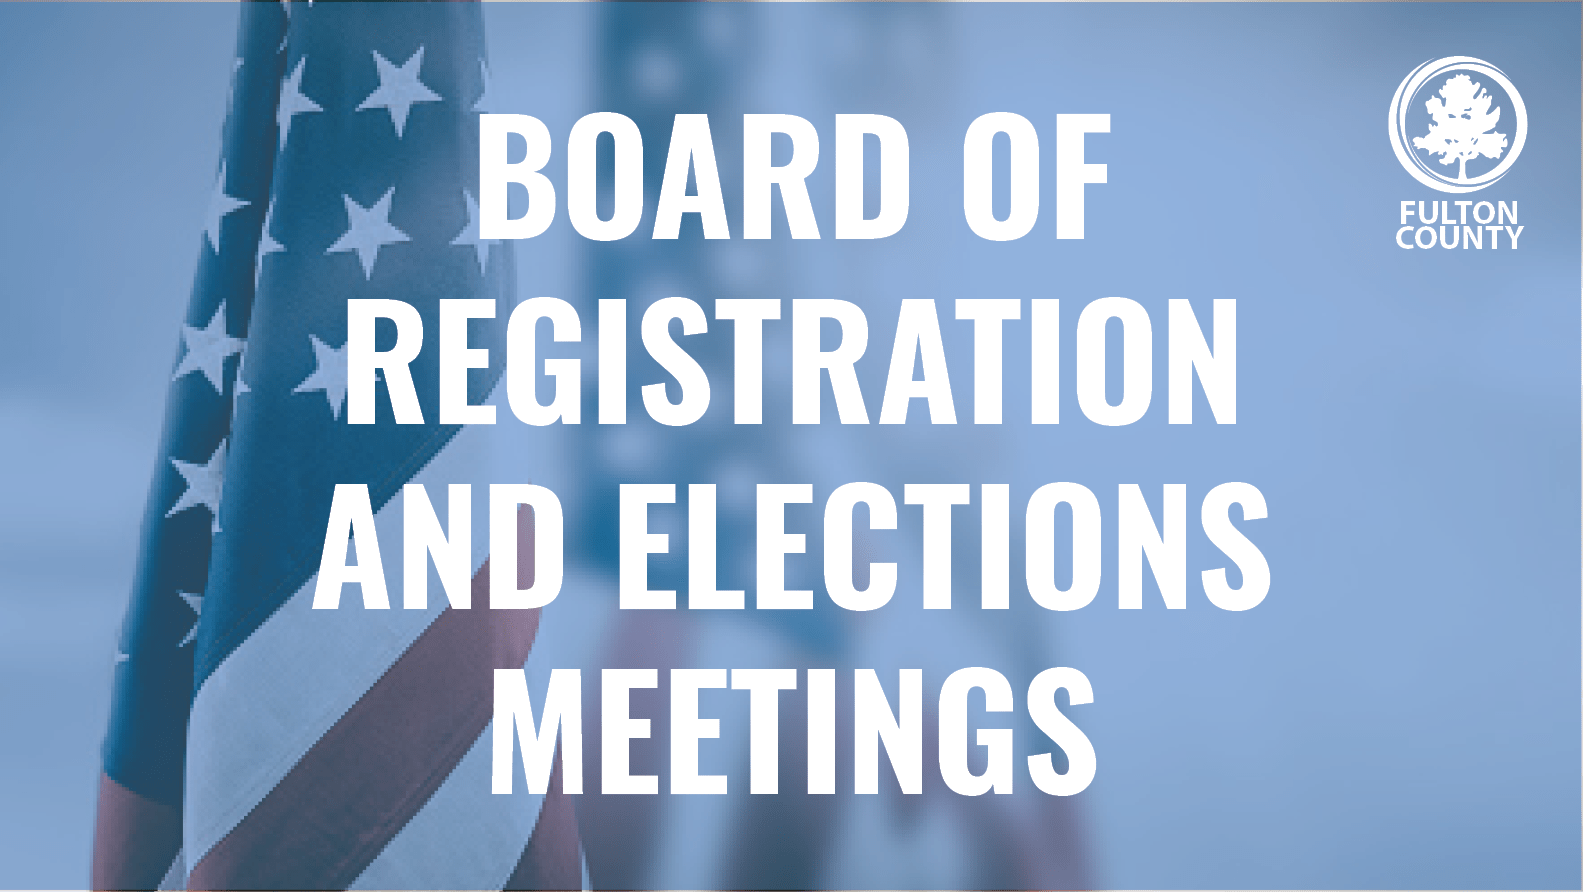 Fulton County 2022 Calendar Registration And Elections To Hold Special Called Meeting Feb 22 2022